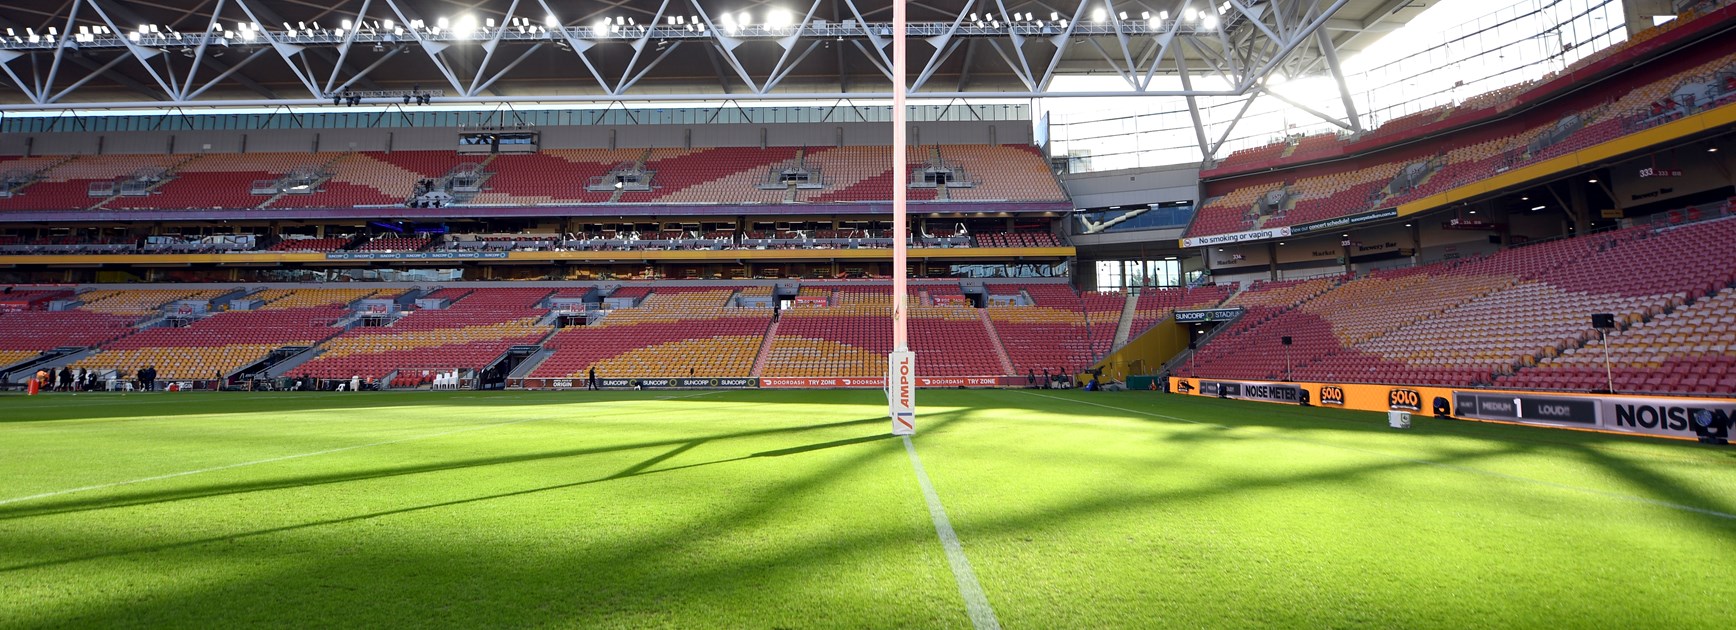 Everything you need to know: State of Origin III - Brisbane